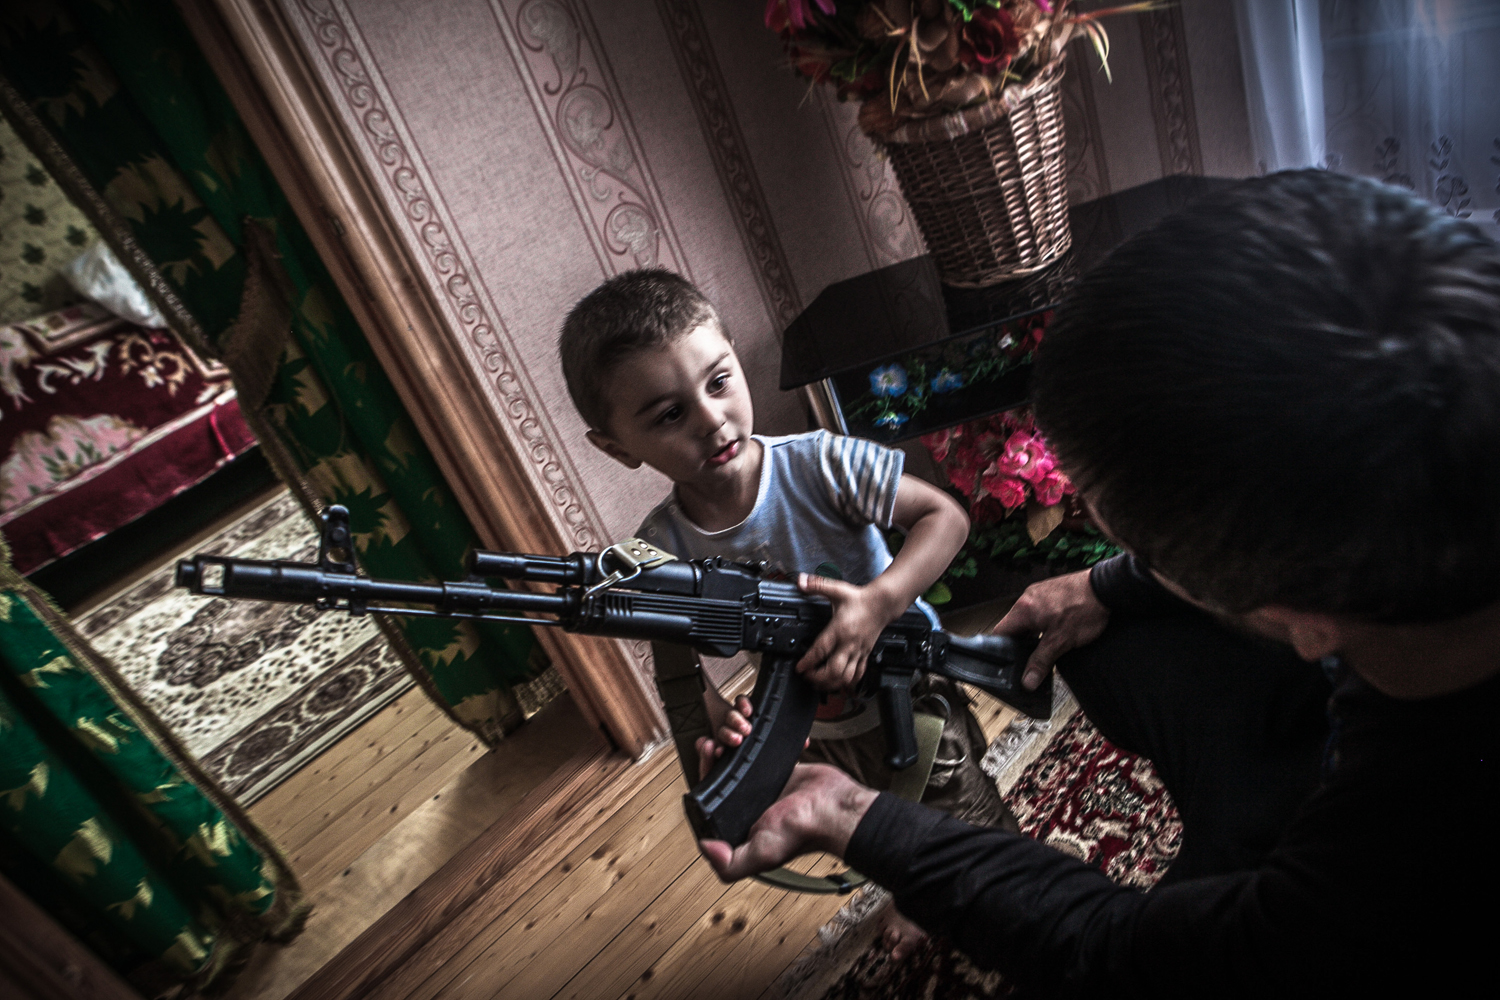 Magomed, a school teacher, shows to his 2year-old nephew how to hold a weapon.Dagestan is the biggest and the most multinational republic in the North Caucasus region. The society is mostly based on traditions and still is very conservative.